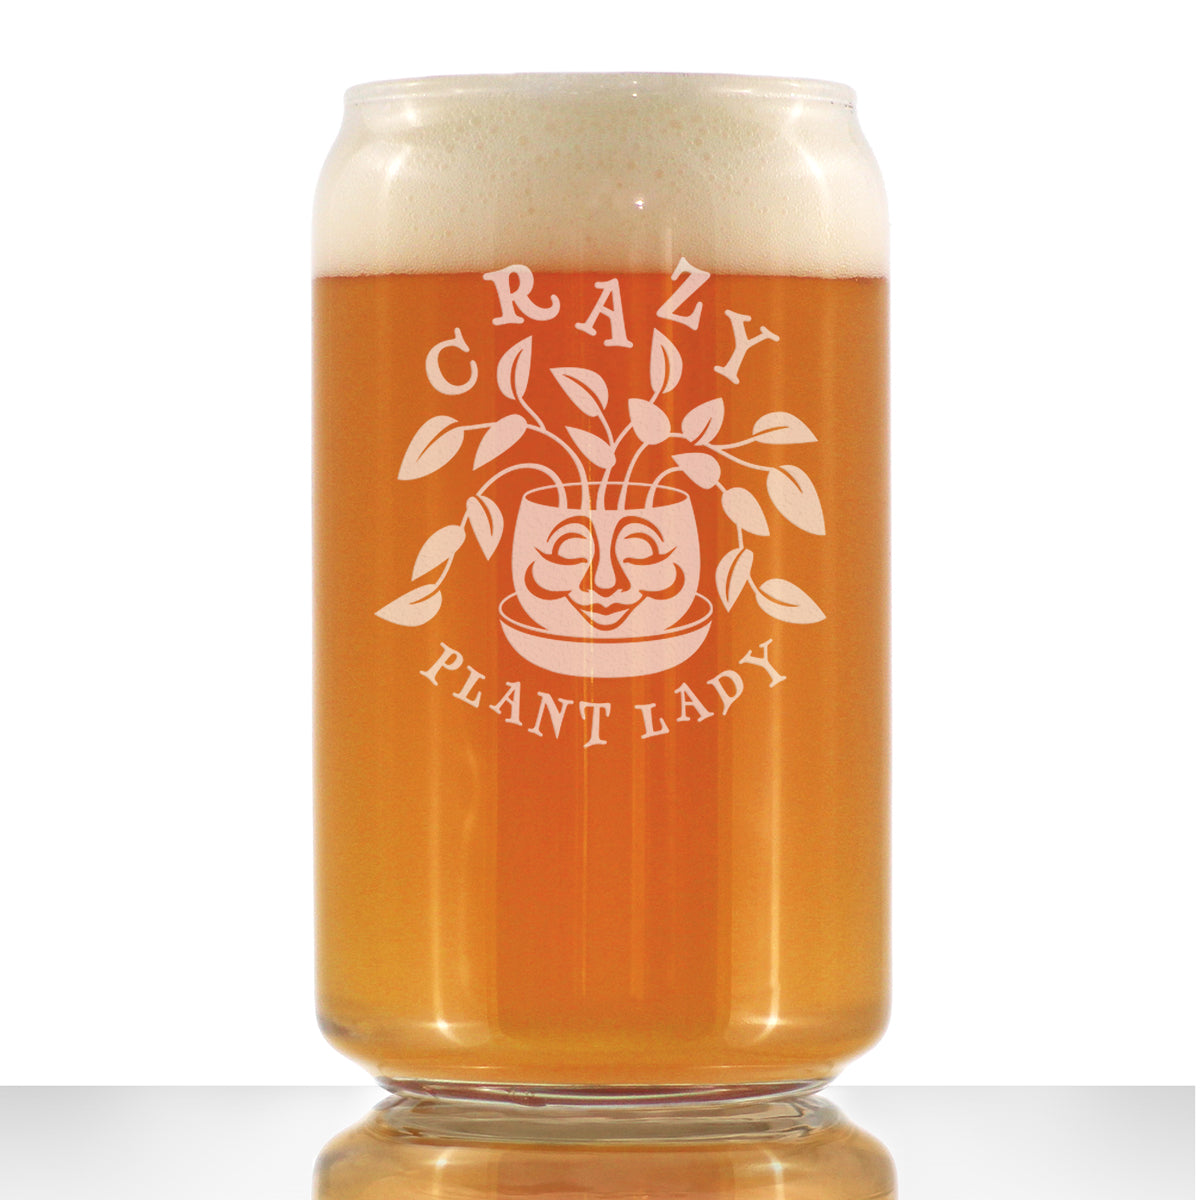 Crazy Plant Lady - Beer Can Pint Glass - Gardening Themed Gifts and Decor for Gardeners - 16 oz Glass